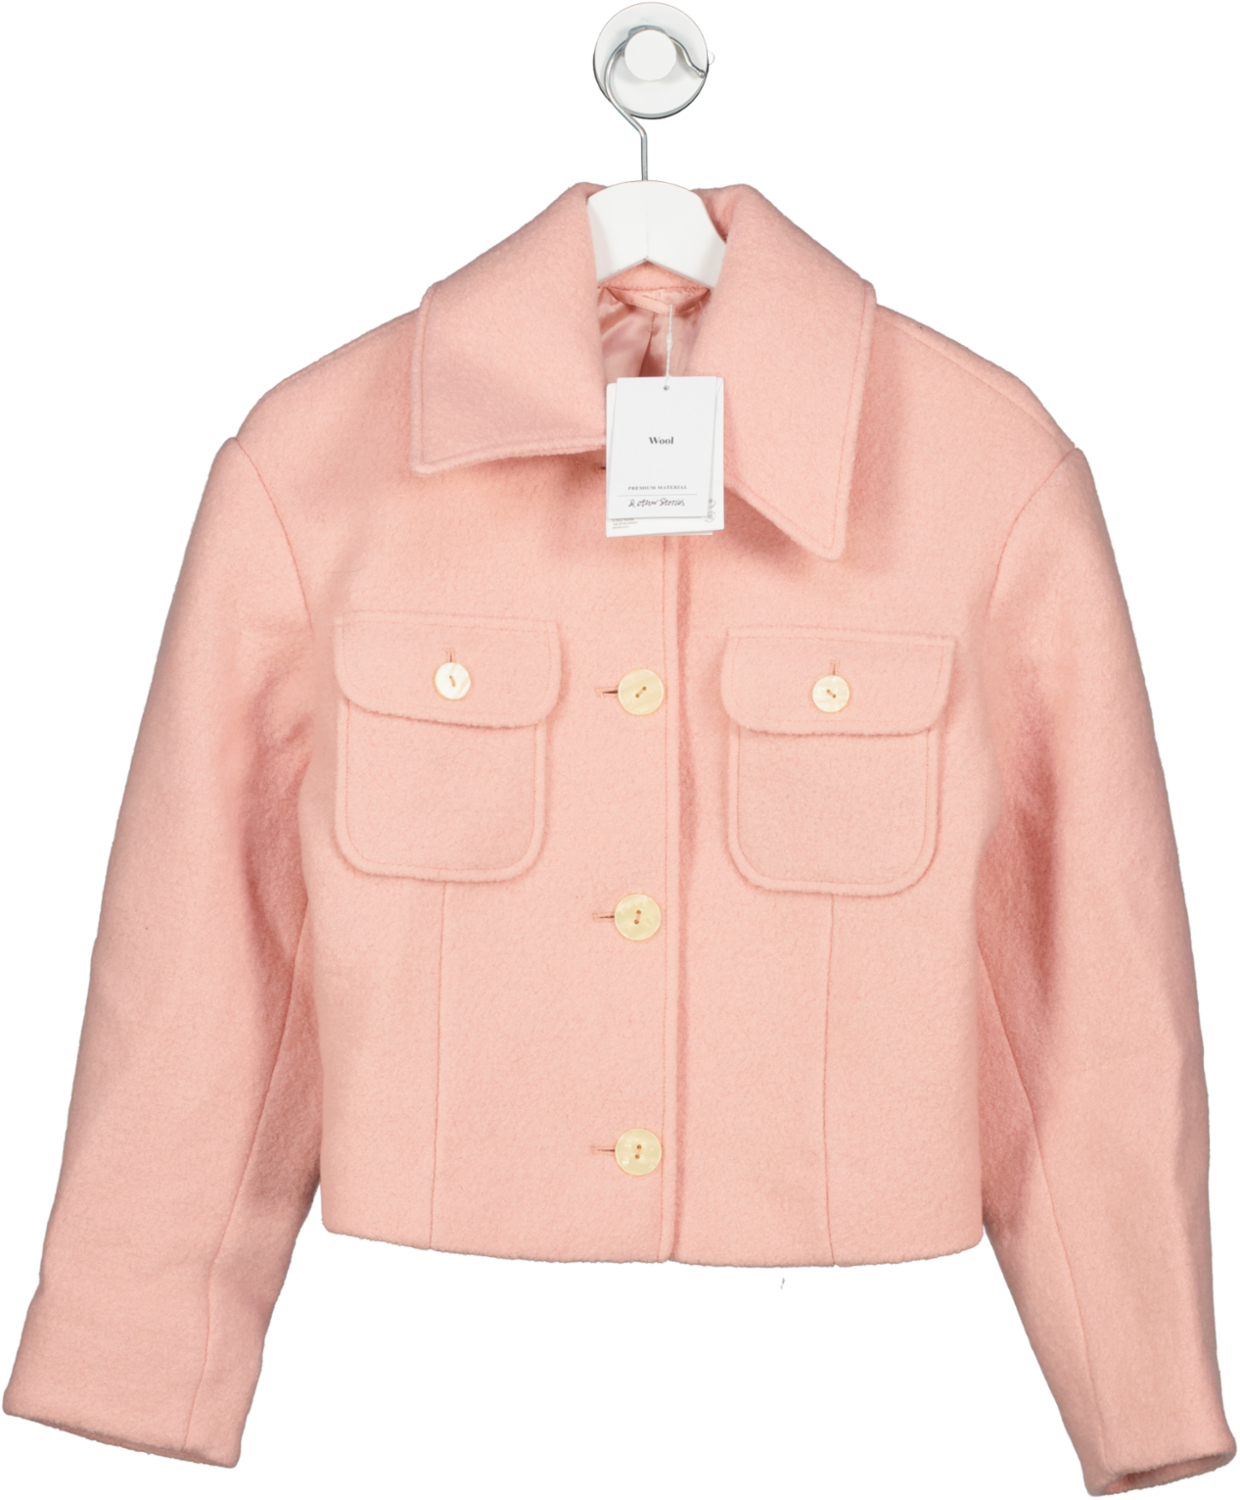 & Other Stories Pink Buttoned Patch Pocket Wool Jacket BNWT UK 6